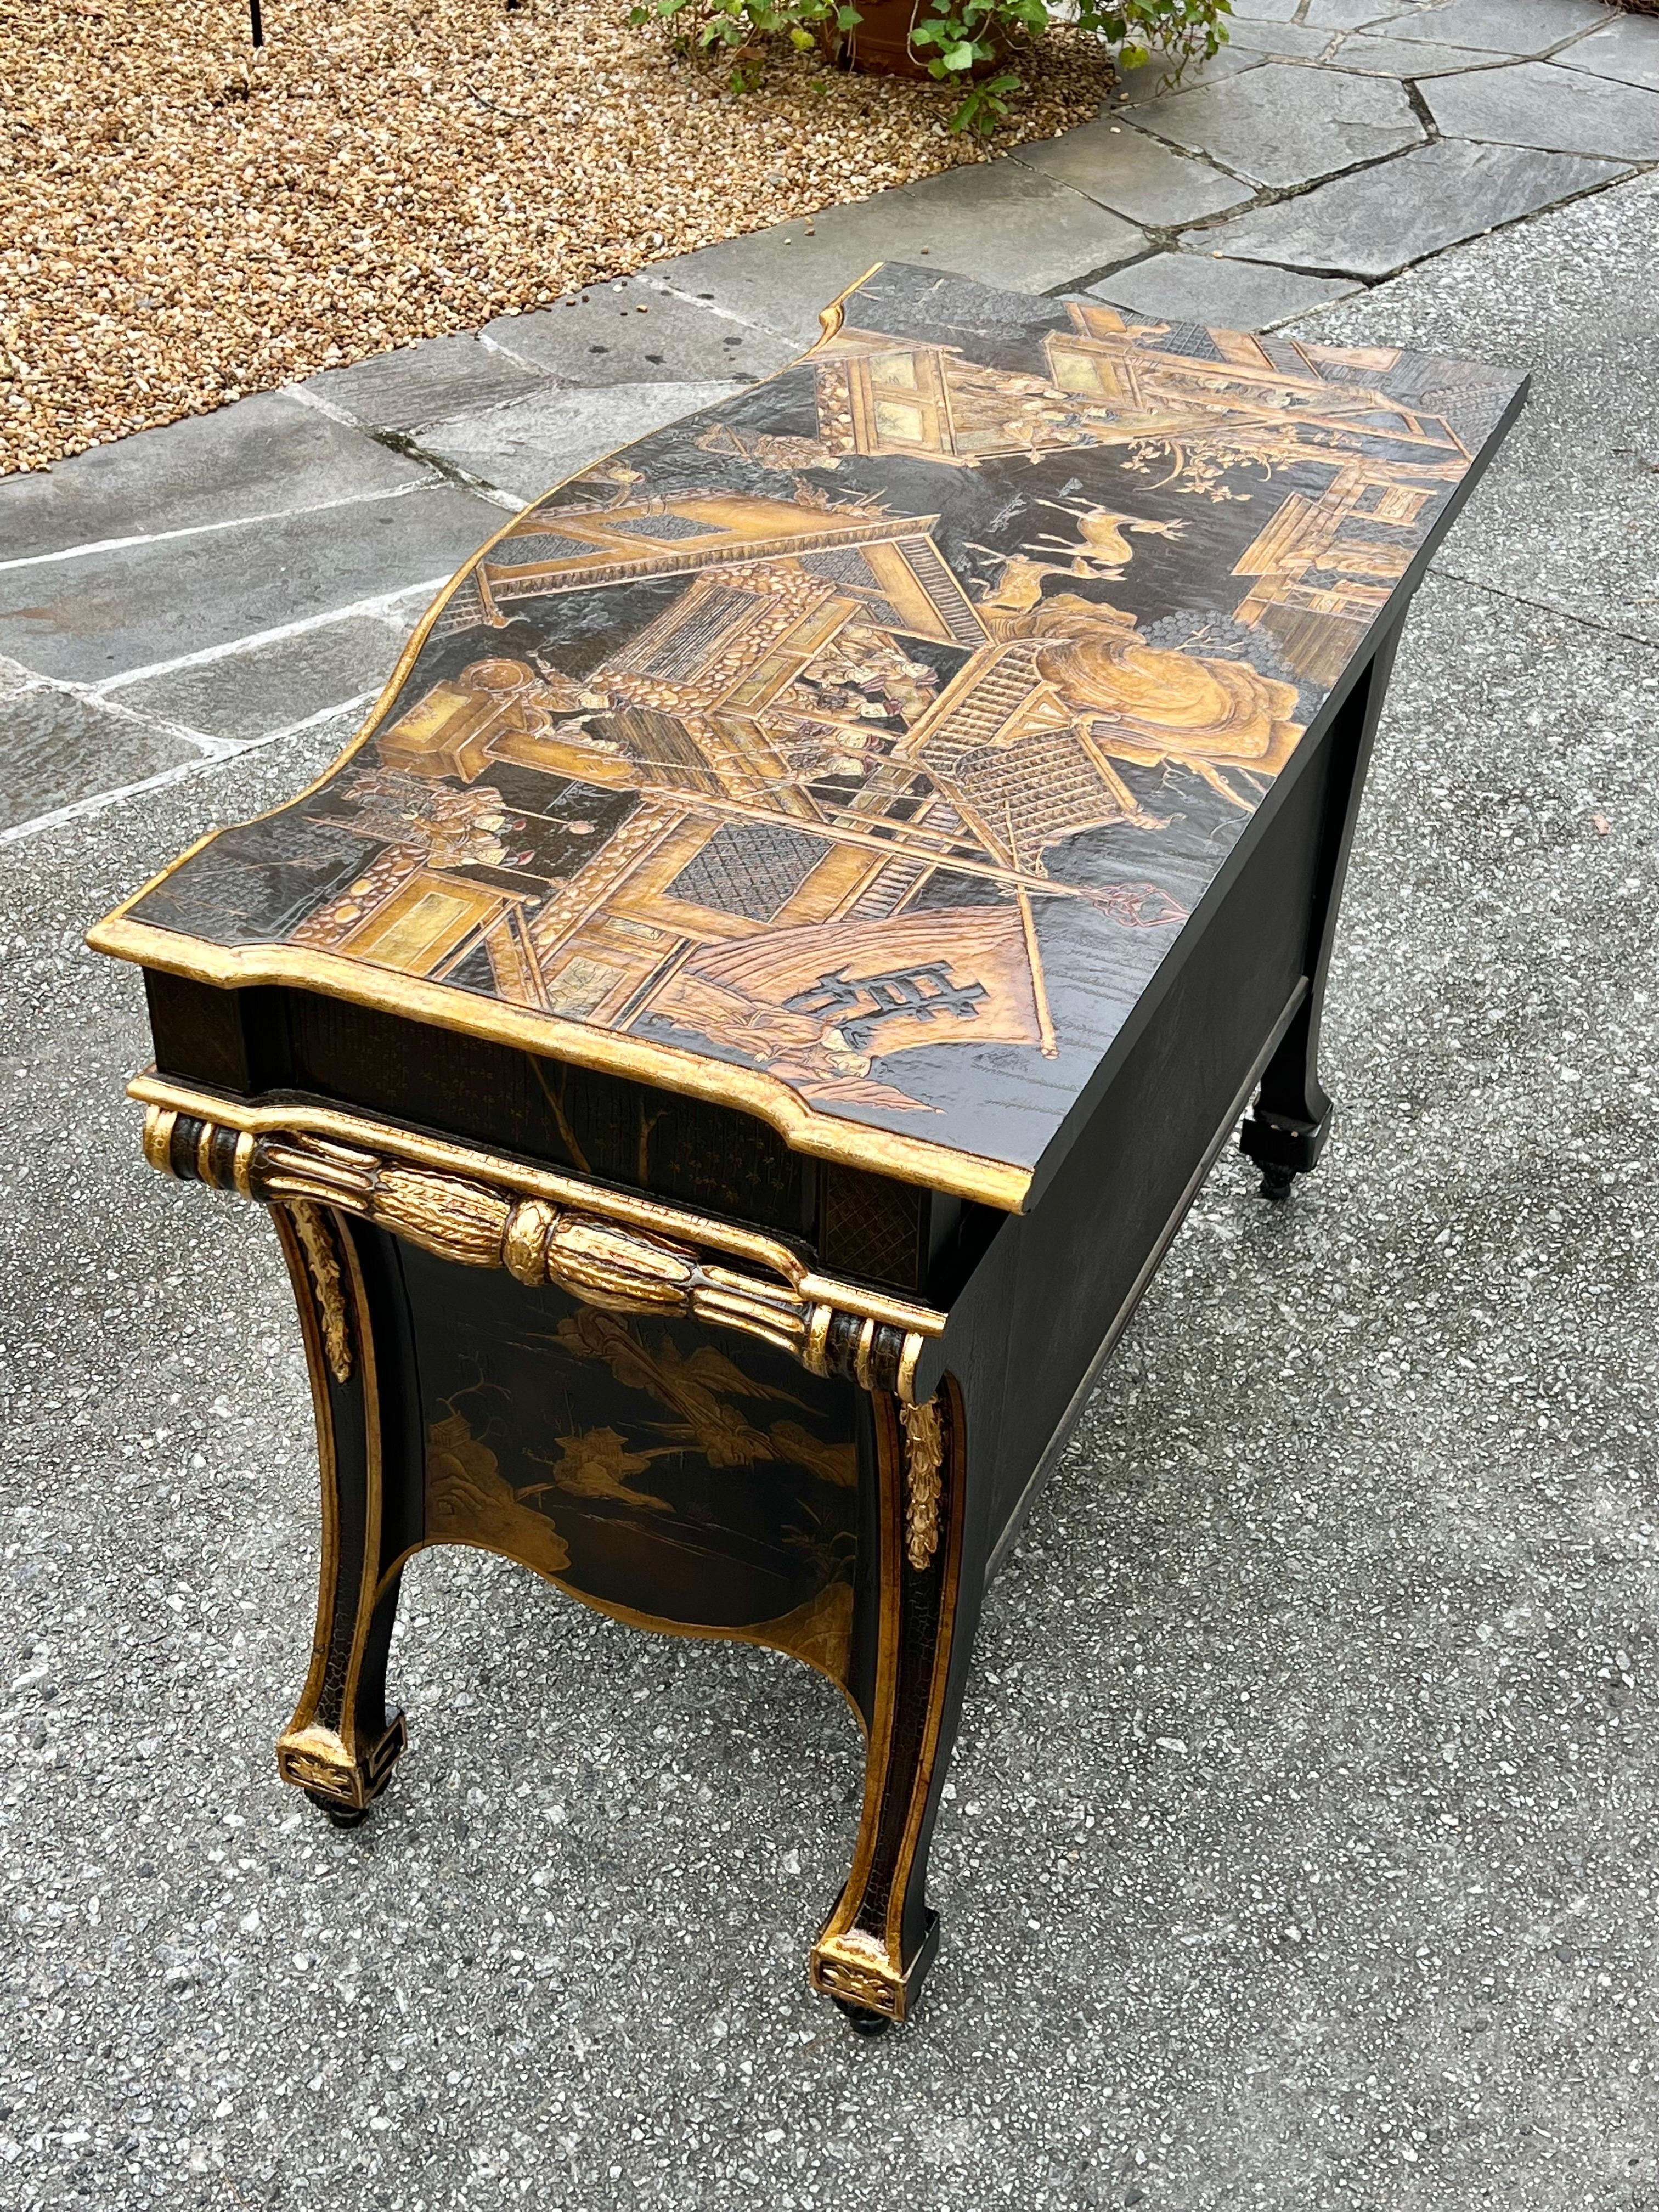 Exquisite Hand Painted Chippendale chinoiserie Commode in Black Lacquer by Baker For Sale 4